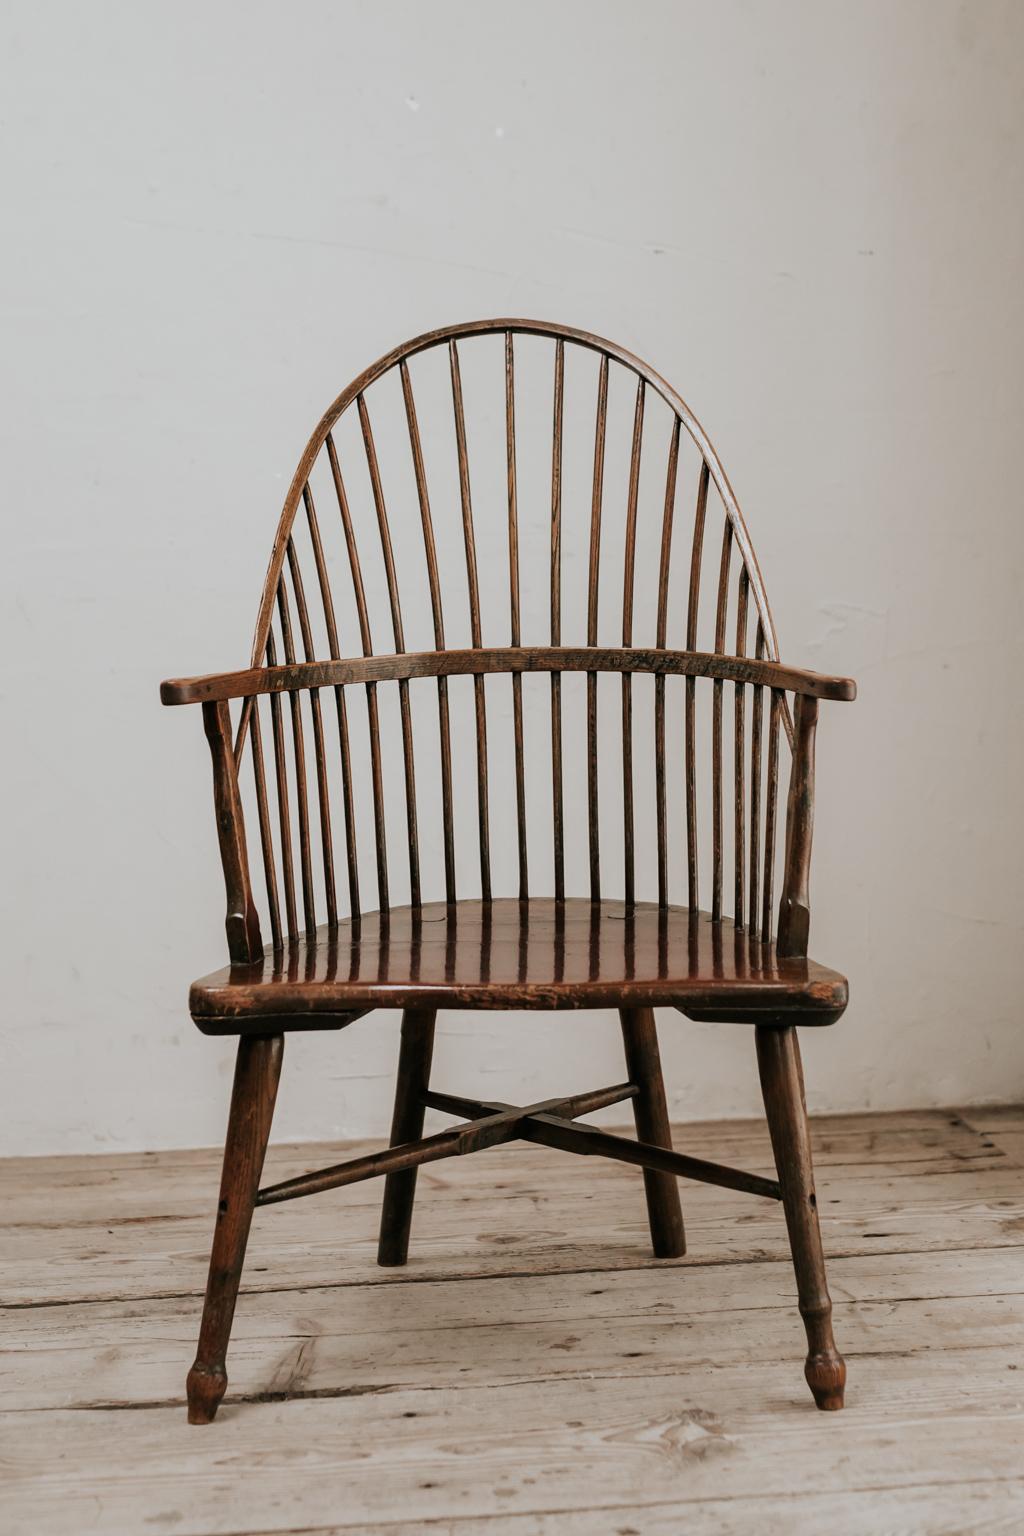 Sublime patina on this 18th century stickback Windsor chair, ash and elm from the Westcountry, UK.